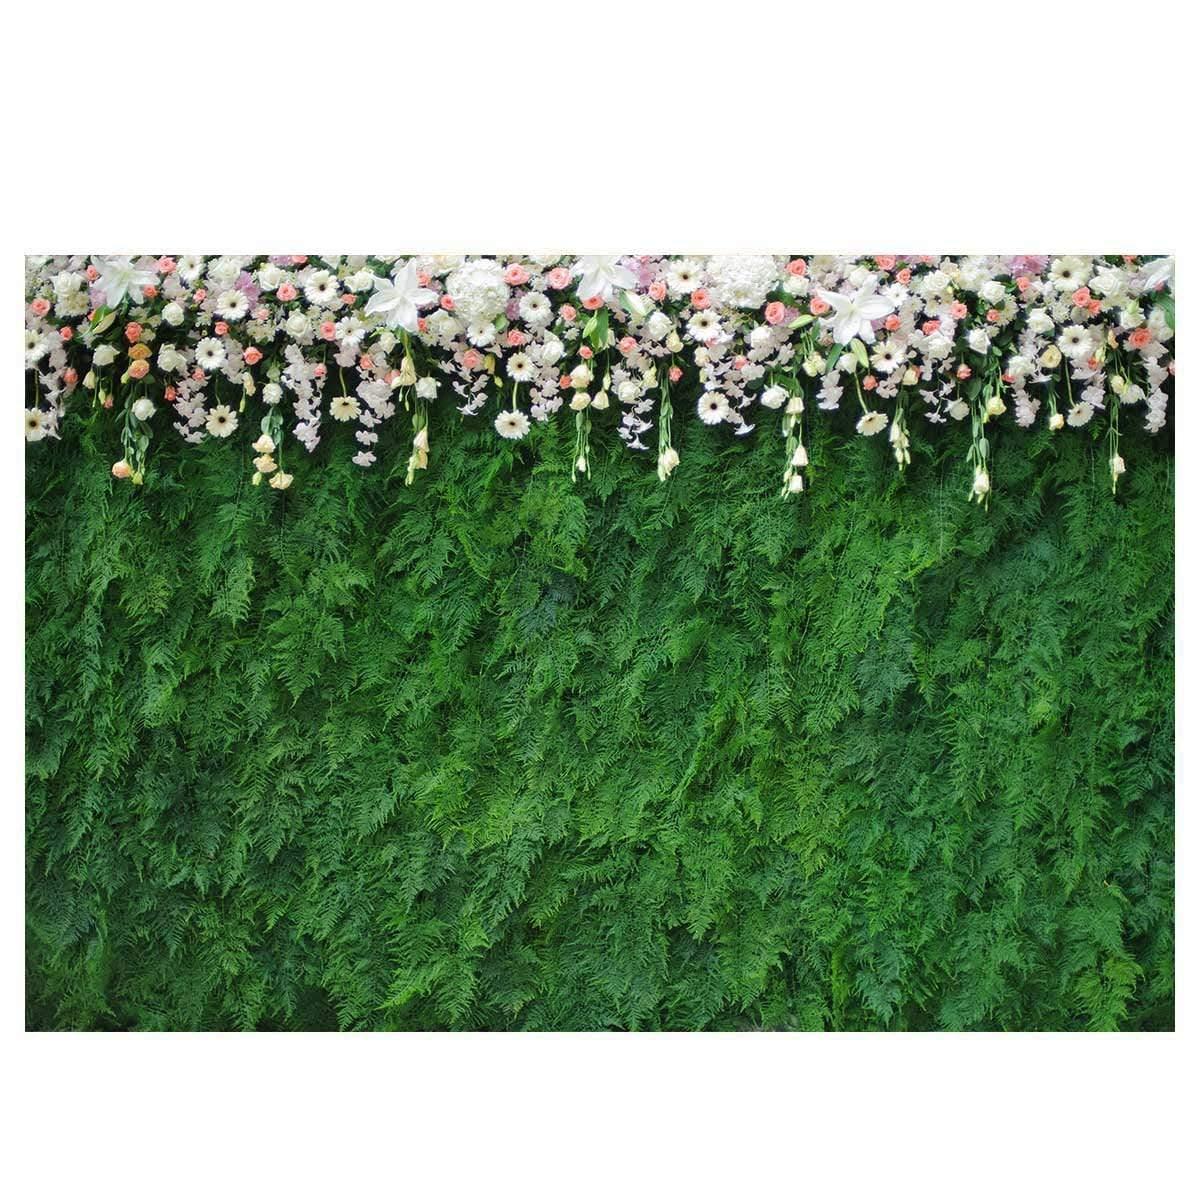 Allenjoy Mother's Day Green Leaves Wall with Floral Backdrop - Allenjoystudio